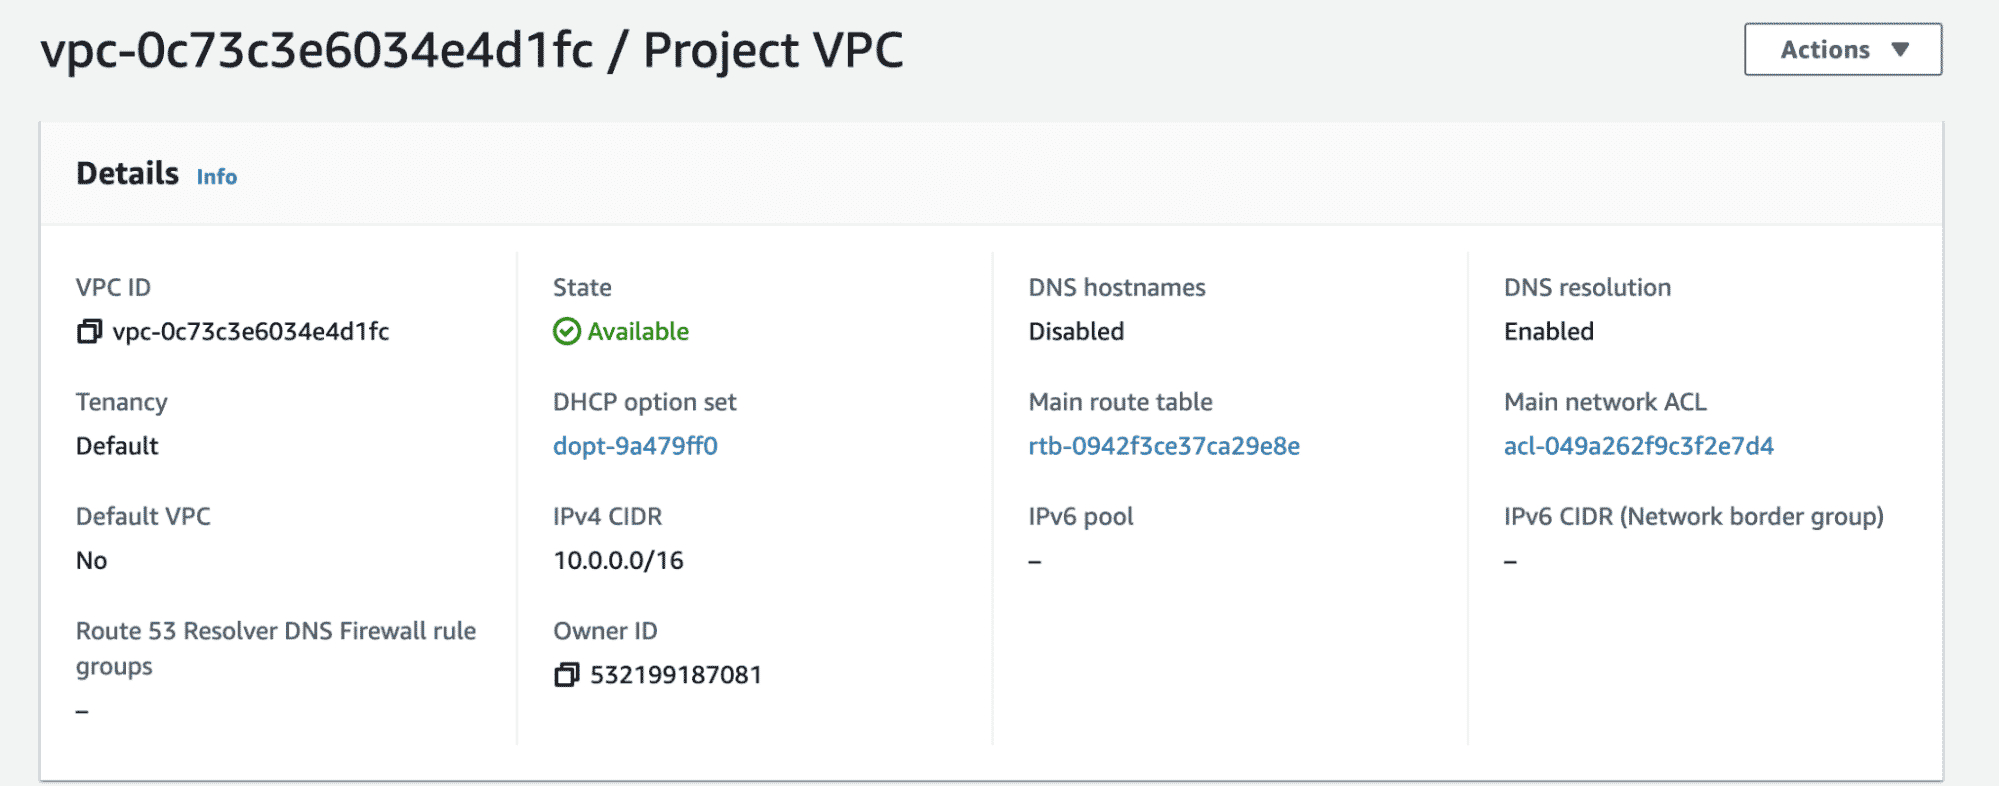 Project VPC